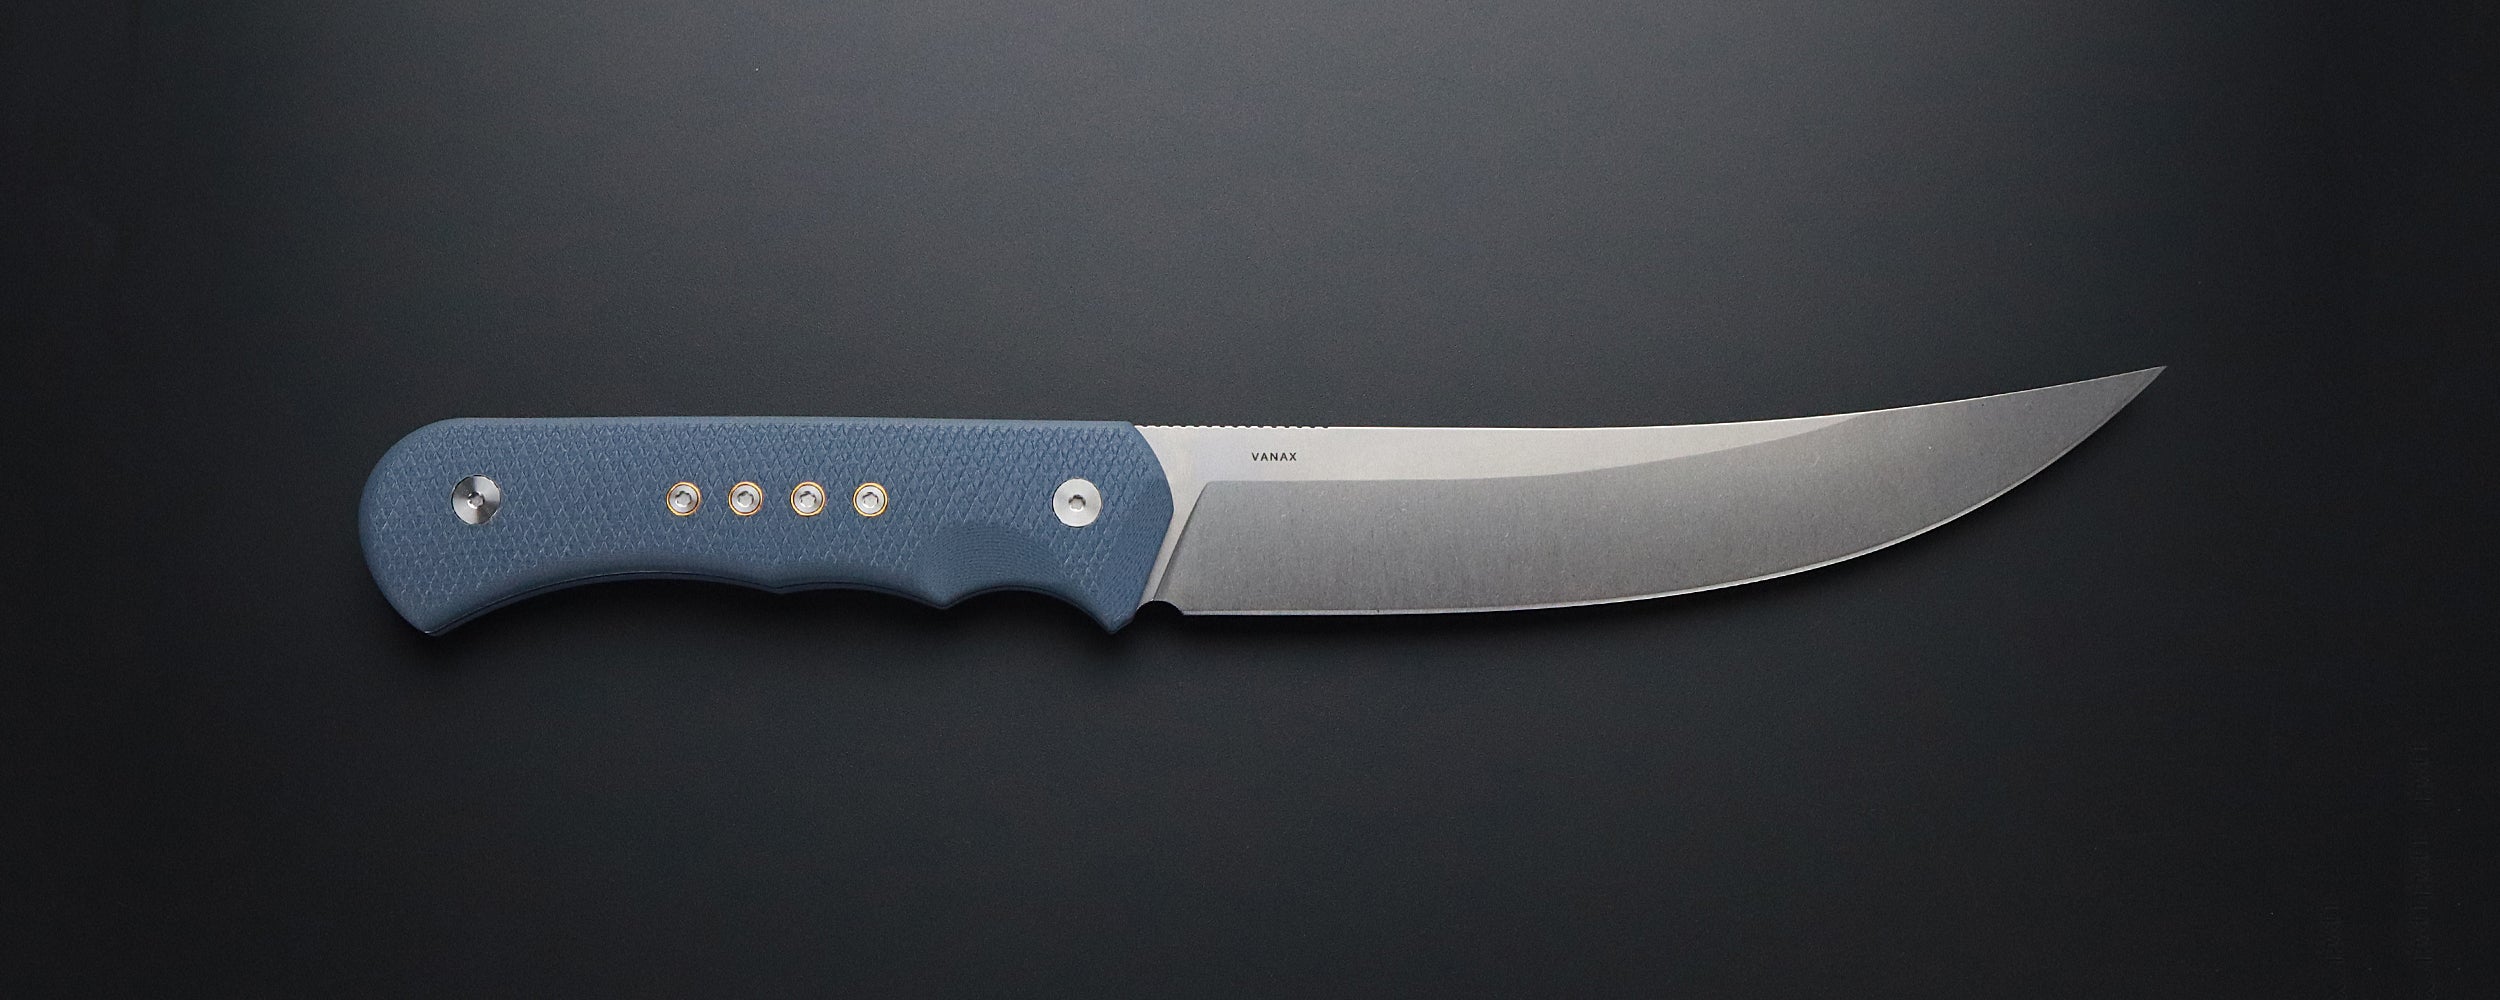 VANAX SUPERCLEAN FILLET KNIFE - knives made for ocean environments